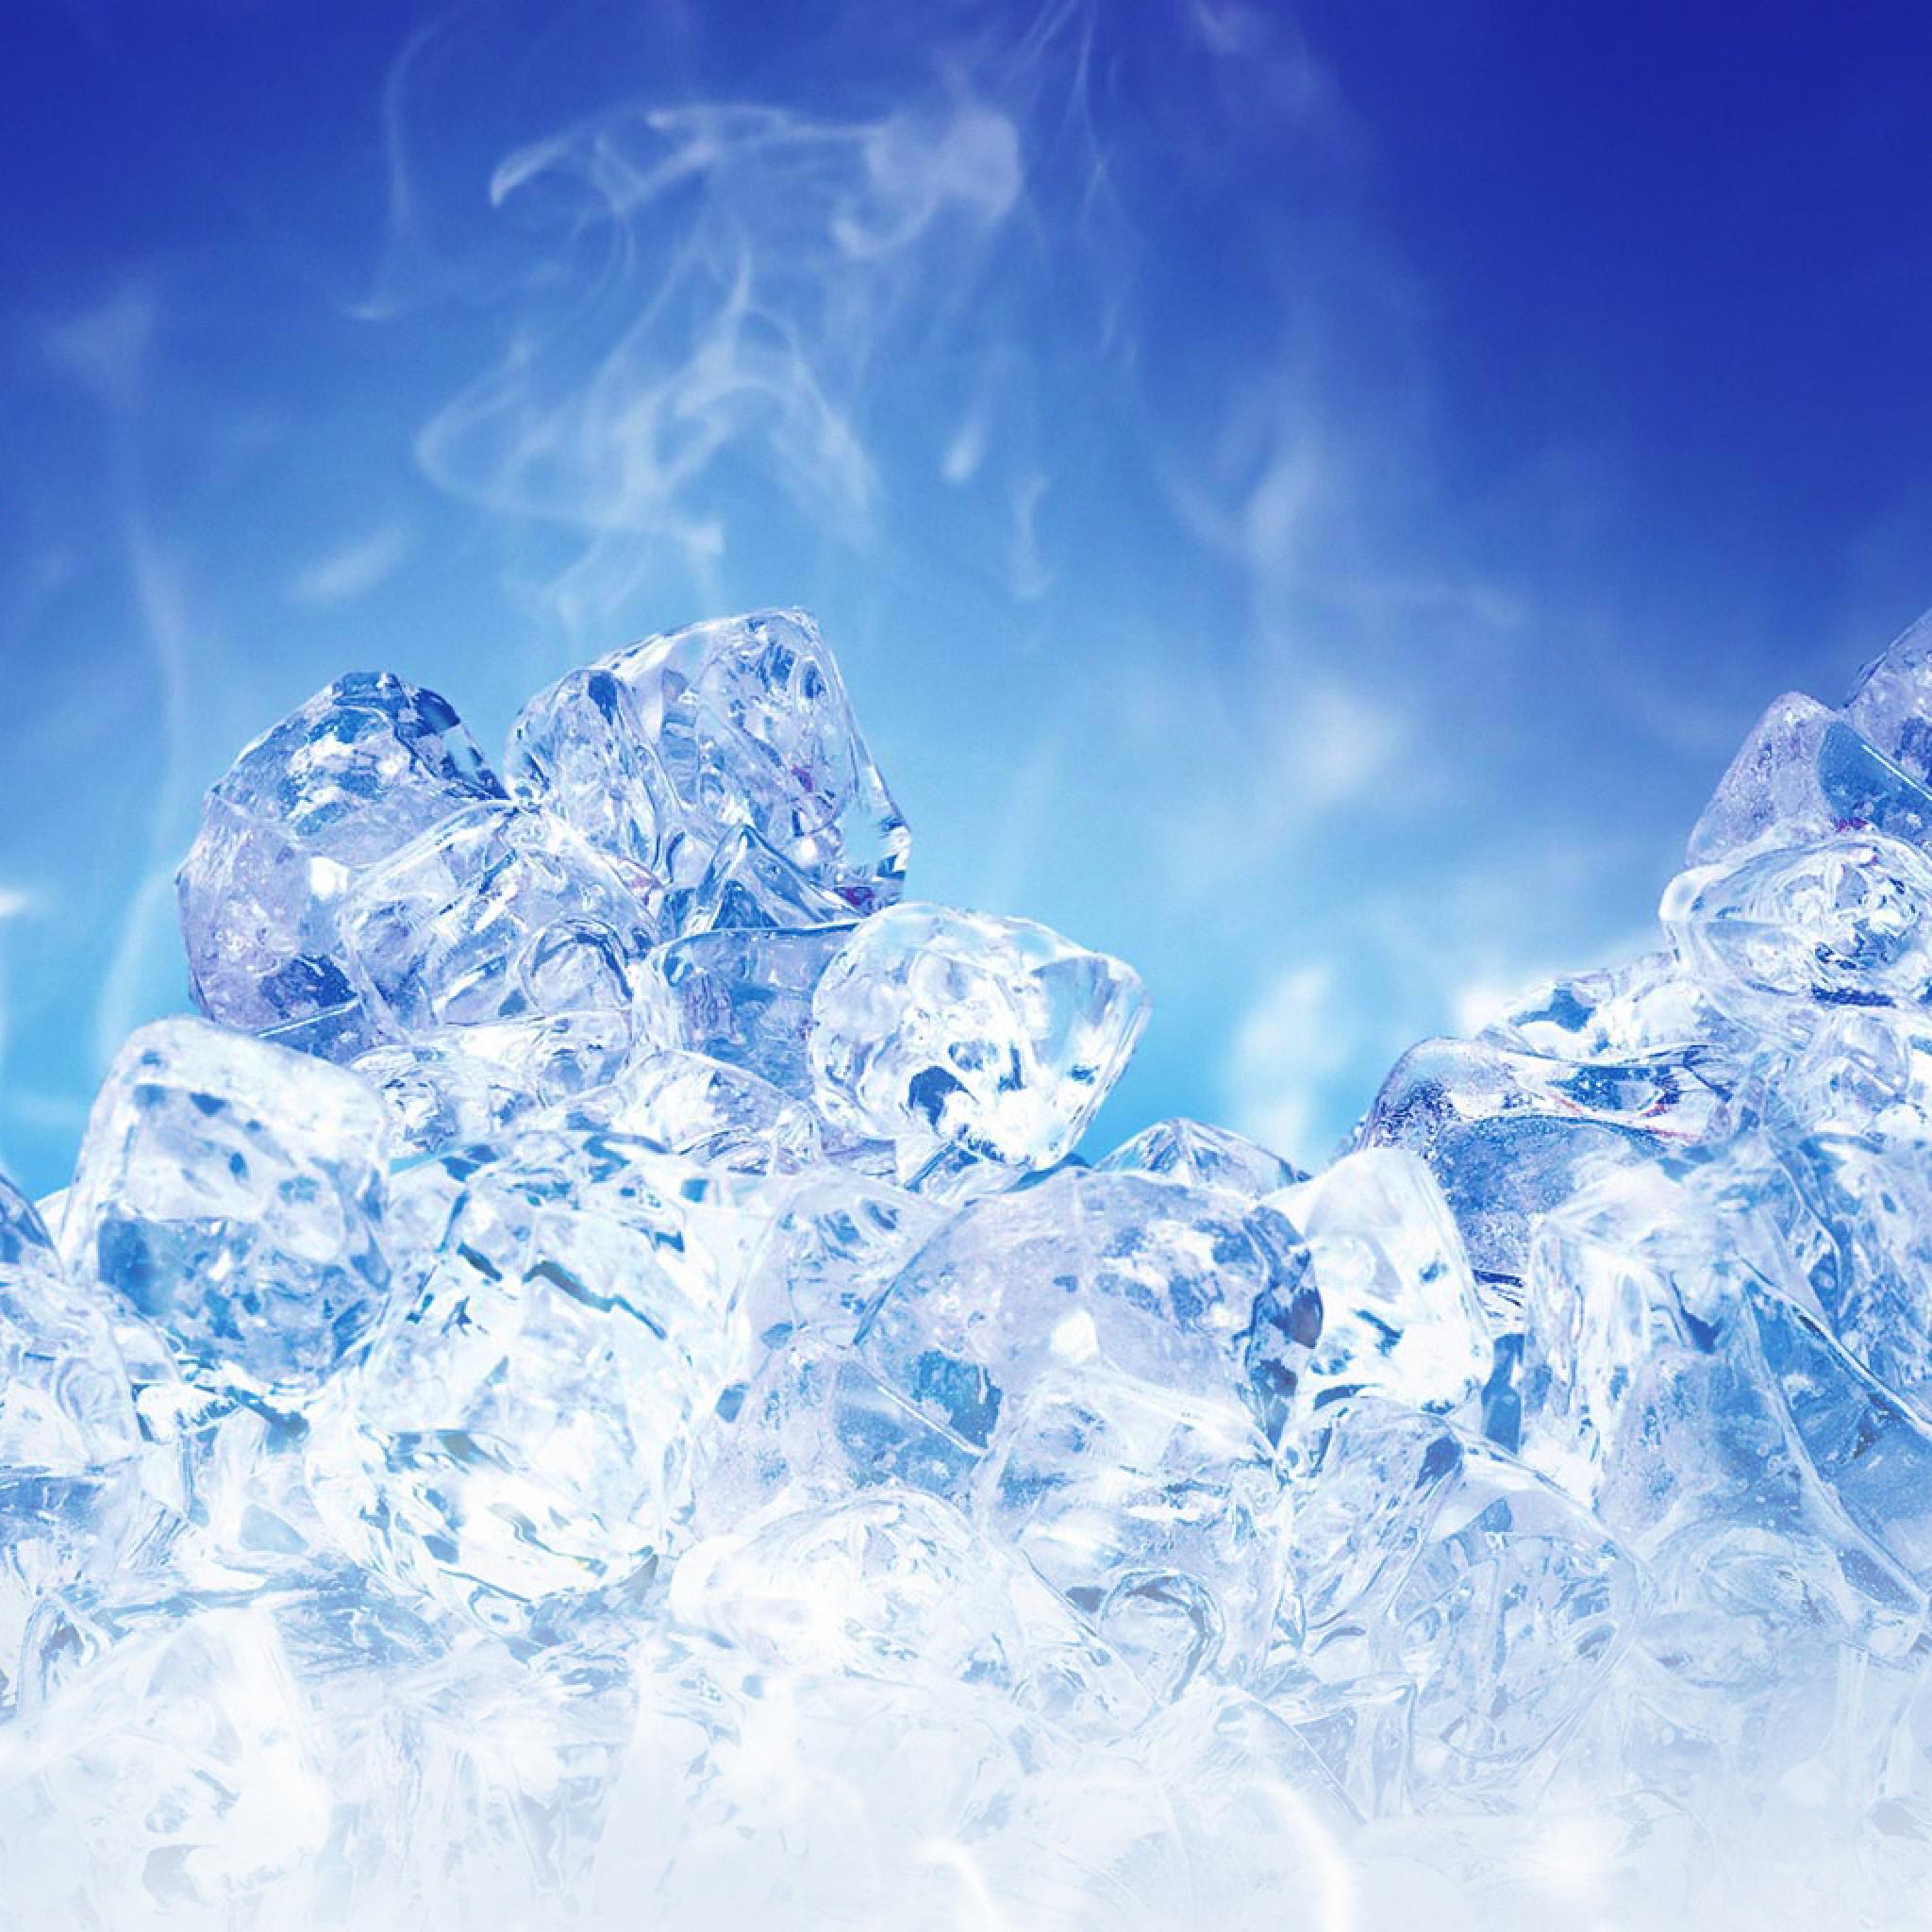 Miscellaneous - Steamy Ice Cubes For Face - iPad iPhone HD Wallpaper ...